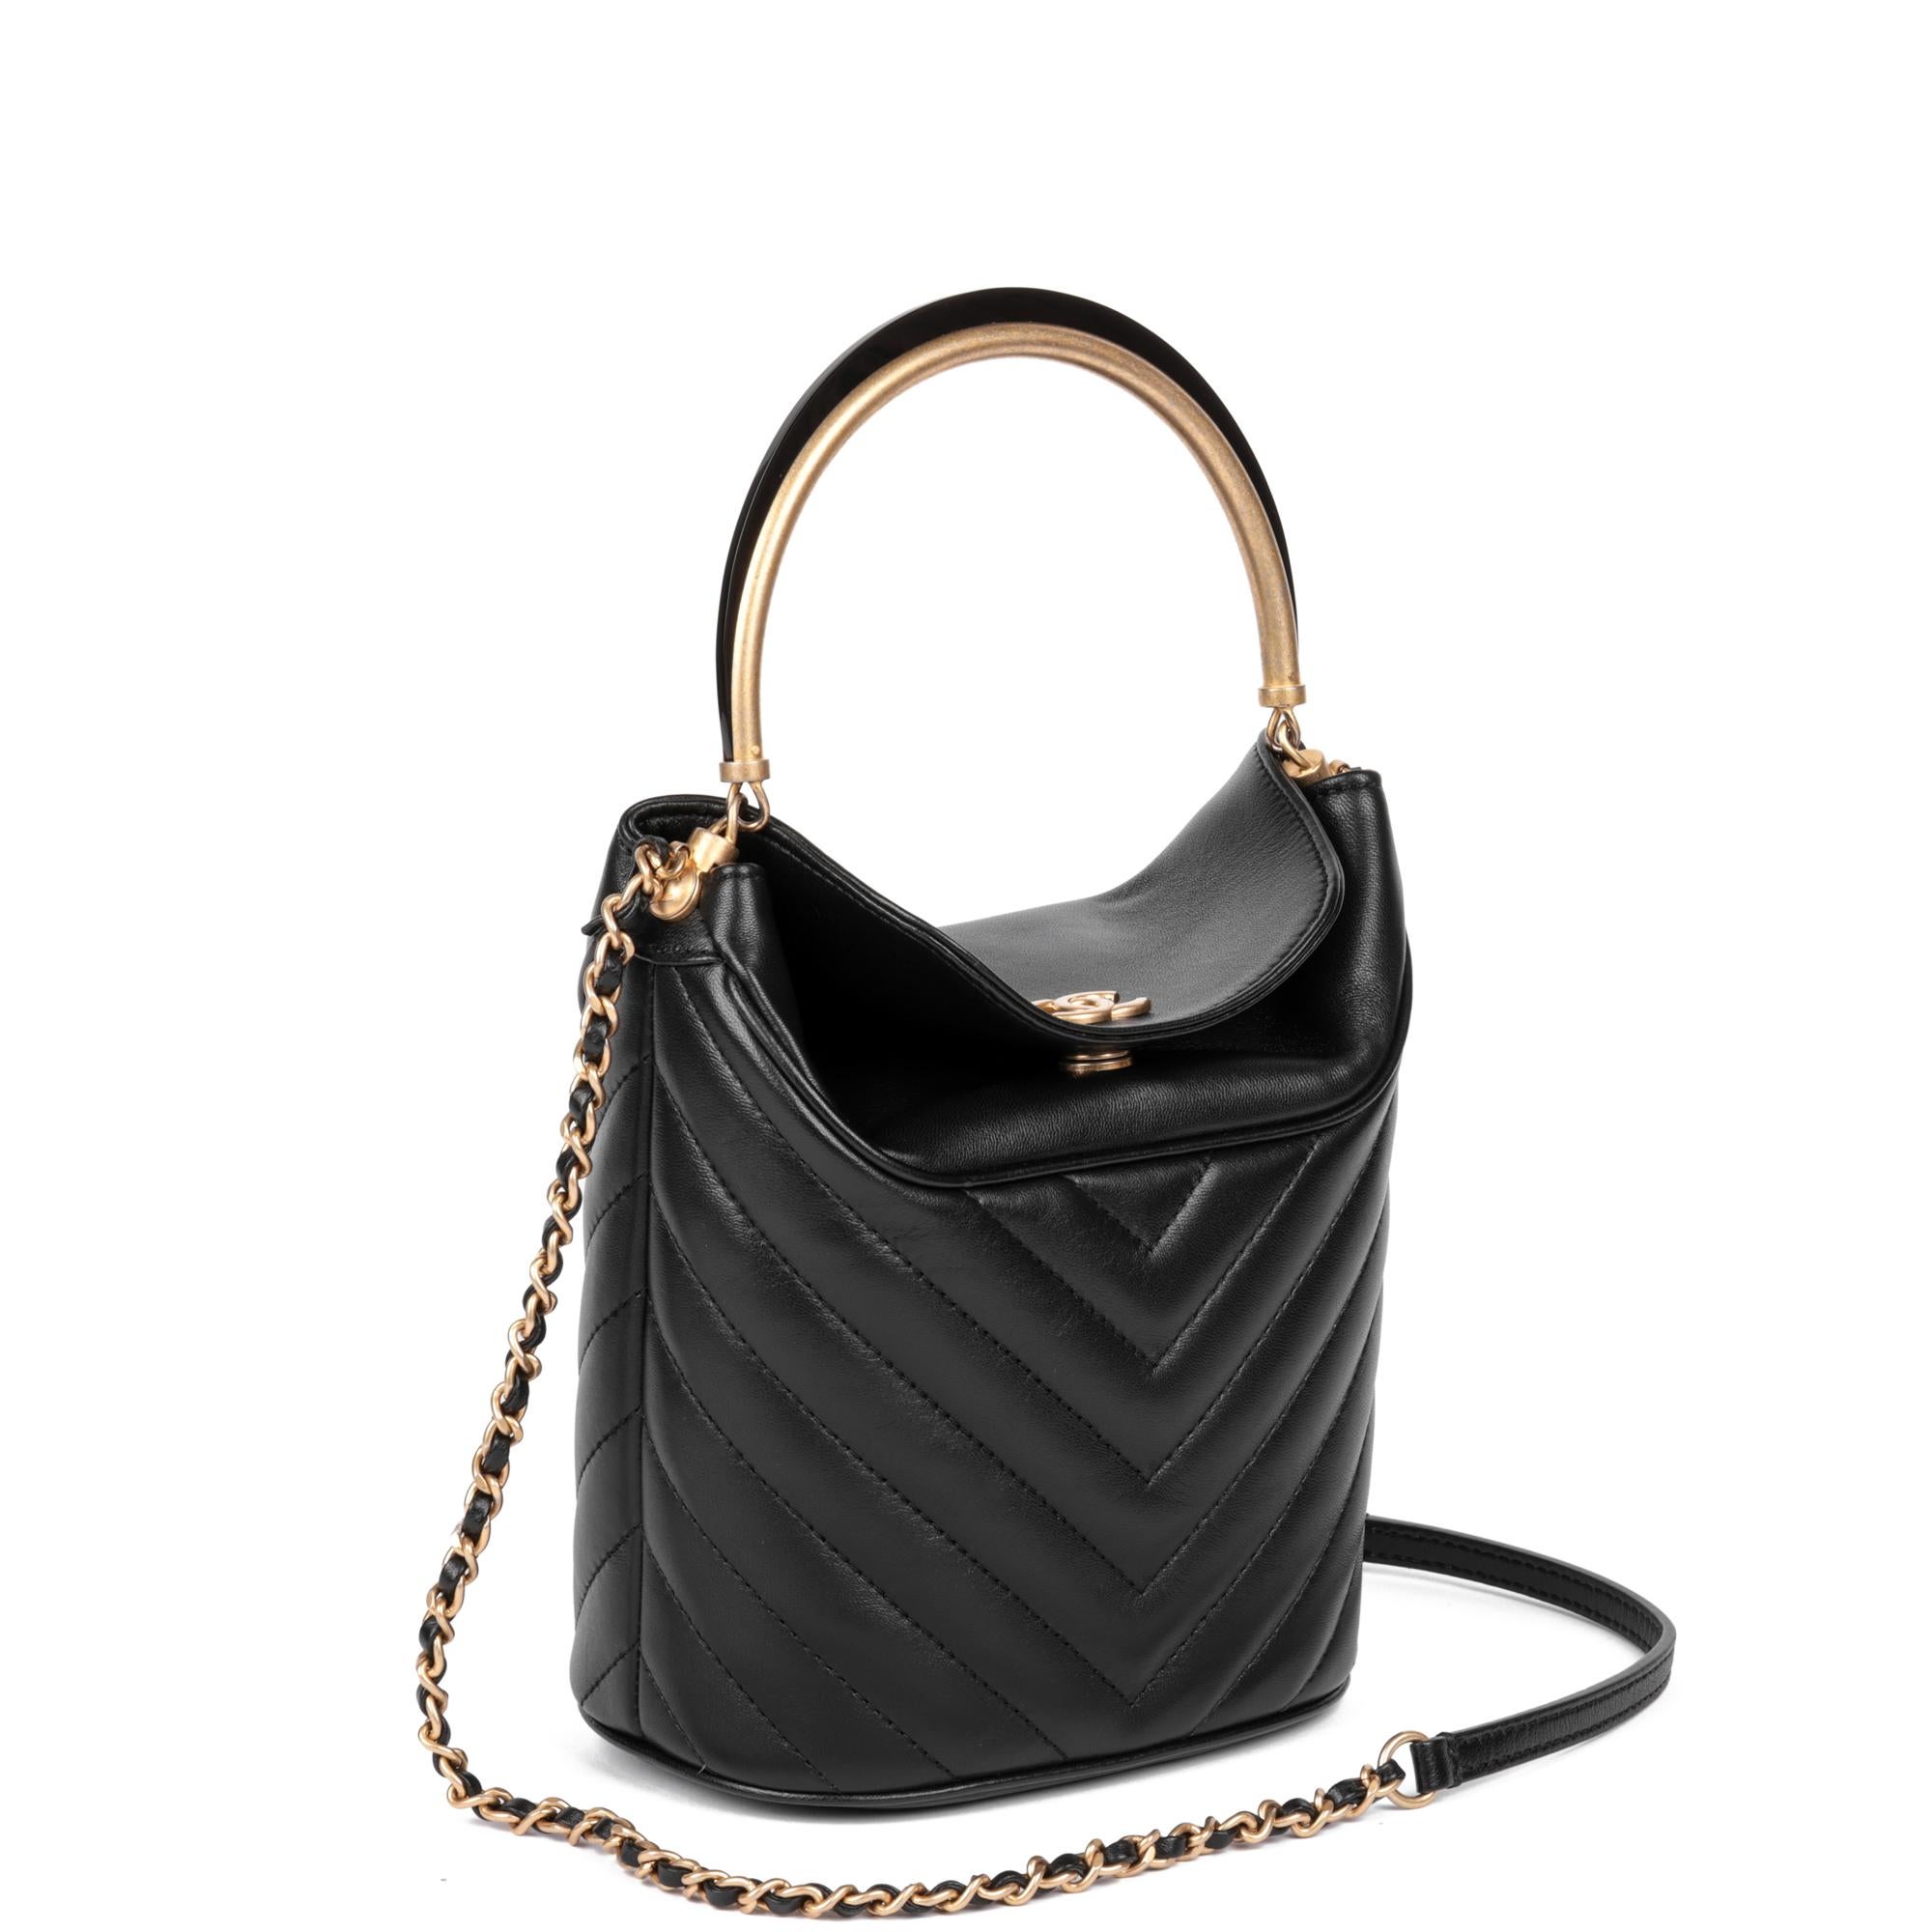 CHANEL
Black Chevron Quilted Lambskin Handle with Chic Bucket Bag

Serial Number: 26037360
Age (Circa): 2019
Accompanied By: Chanel Dust Bag, Box, Authenticity Card
Authenticity Details: Authenticity Card, Serial Sticker (Made in Italy)
Gender: